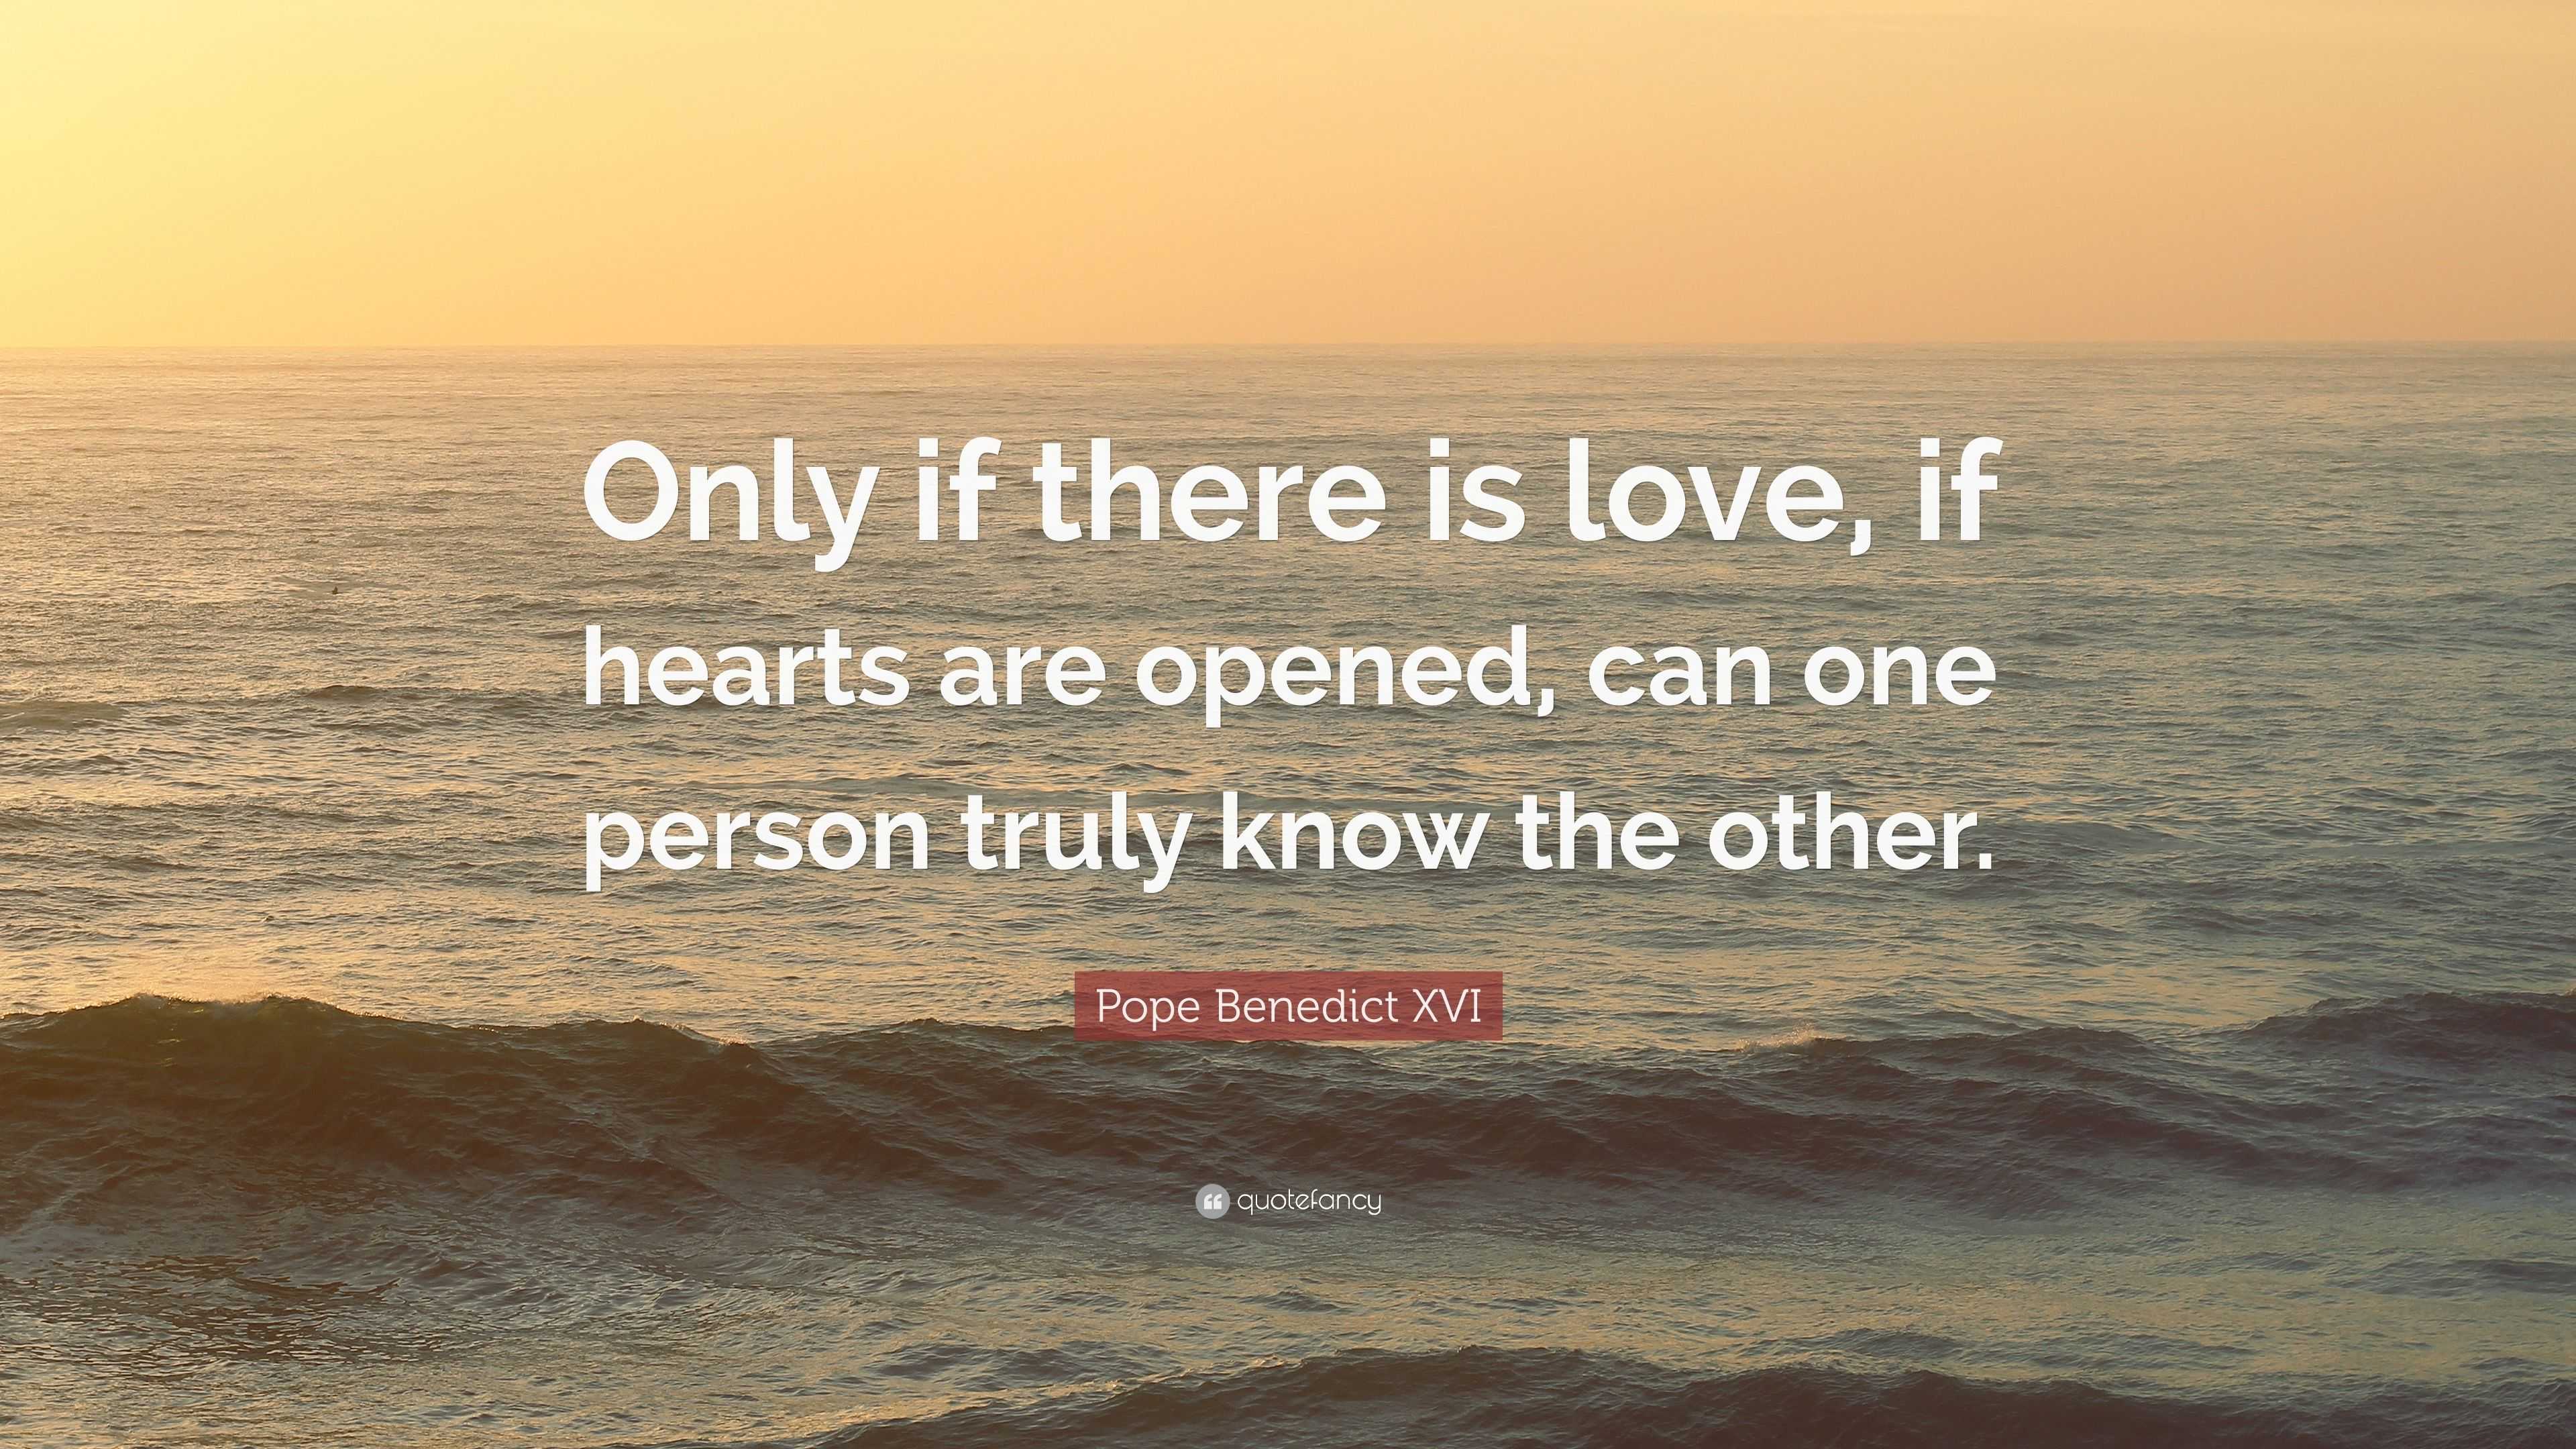 Pope Benedict XVI Quote: “Only if there is love, if hearts are opened ...